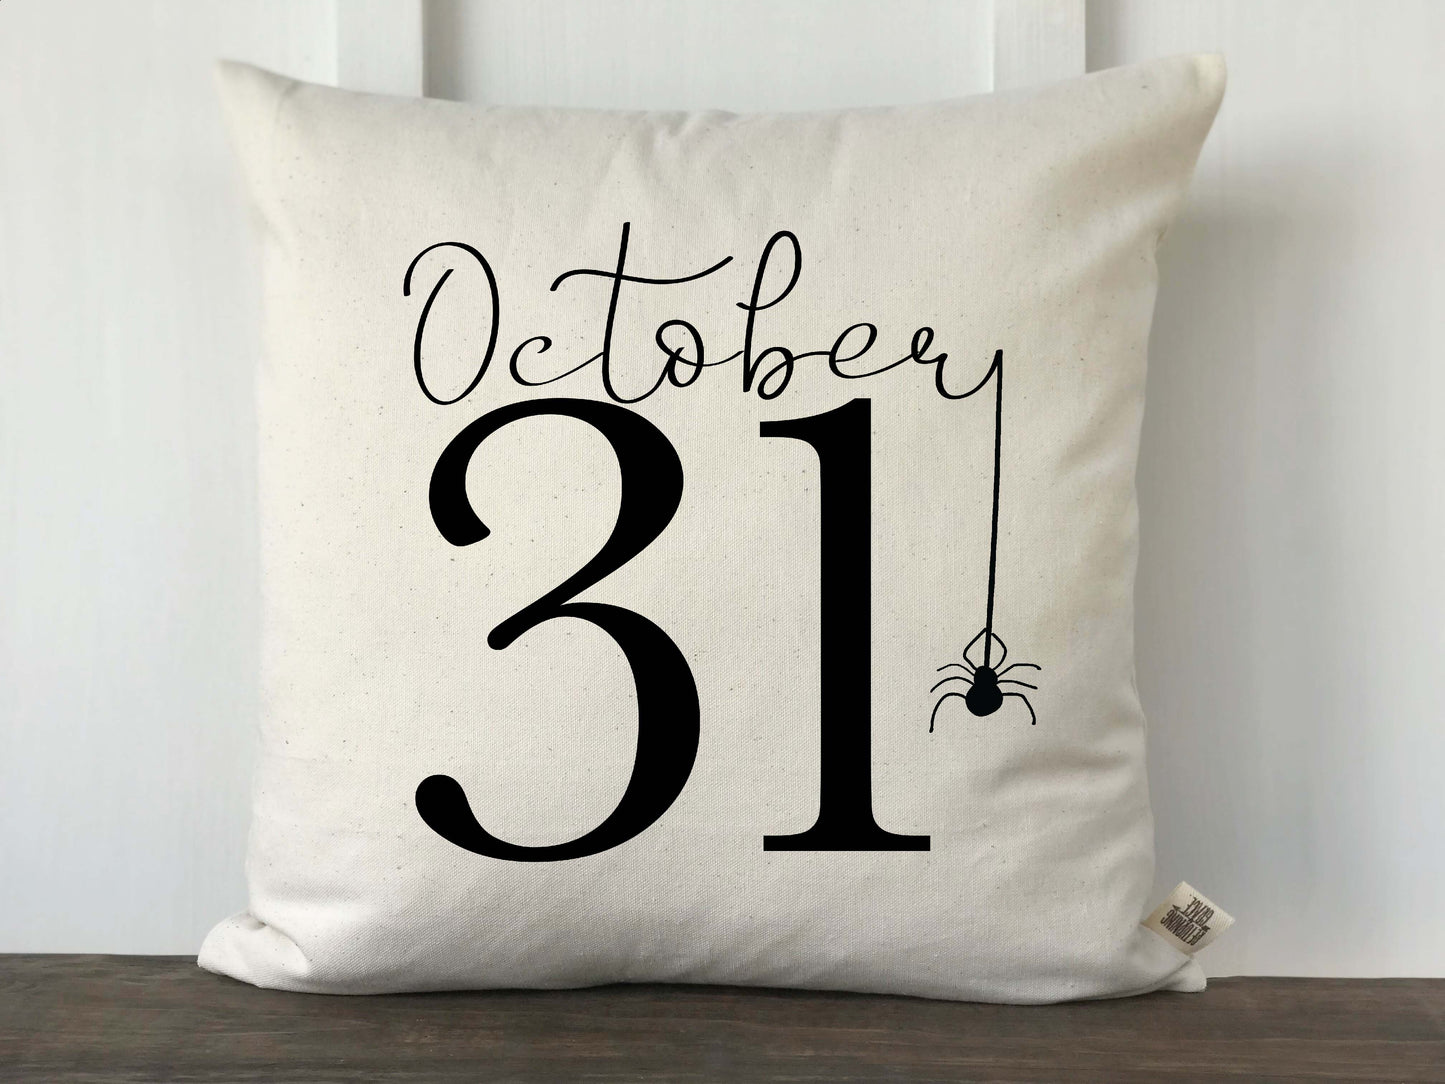 Oct 31 with Spider Pillow Cover